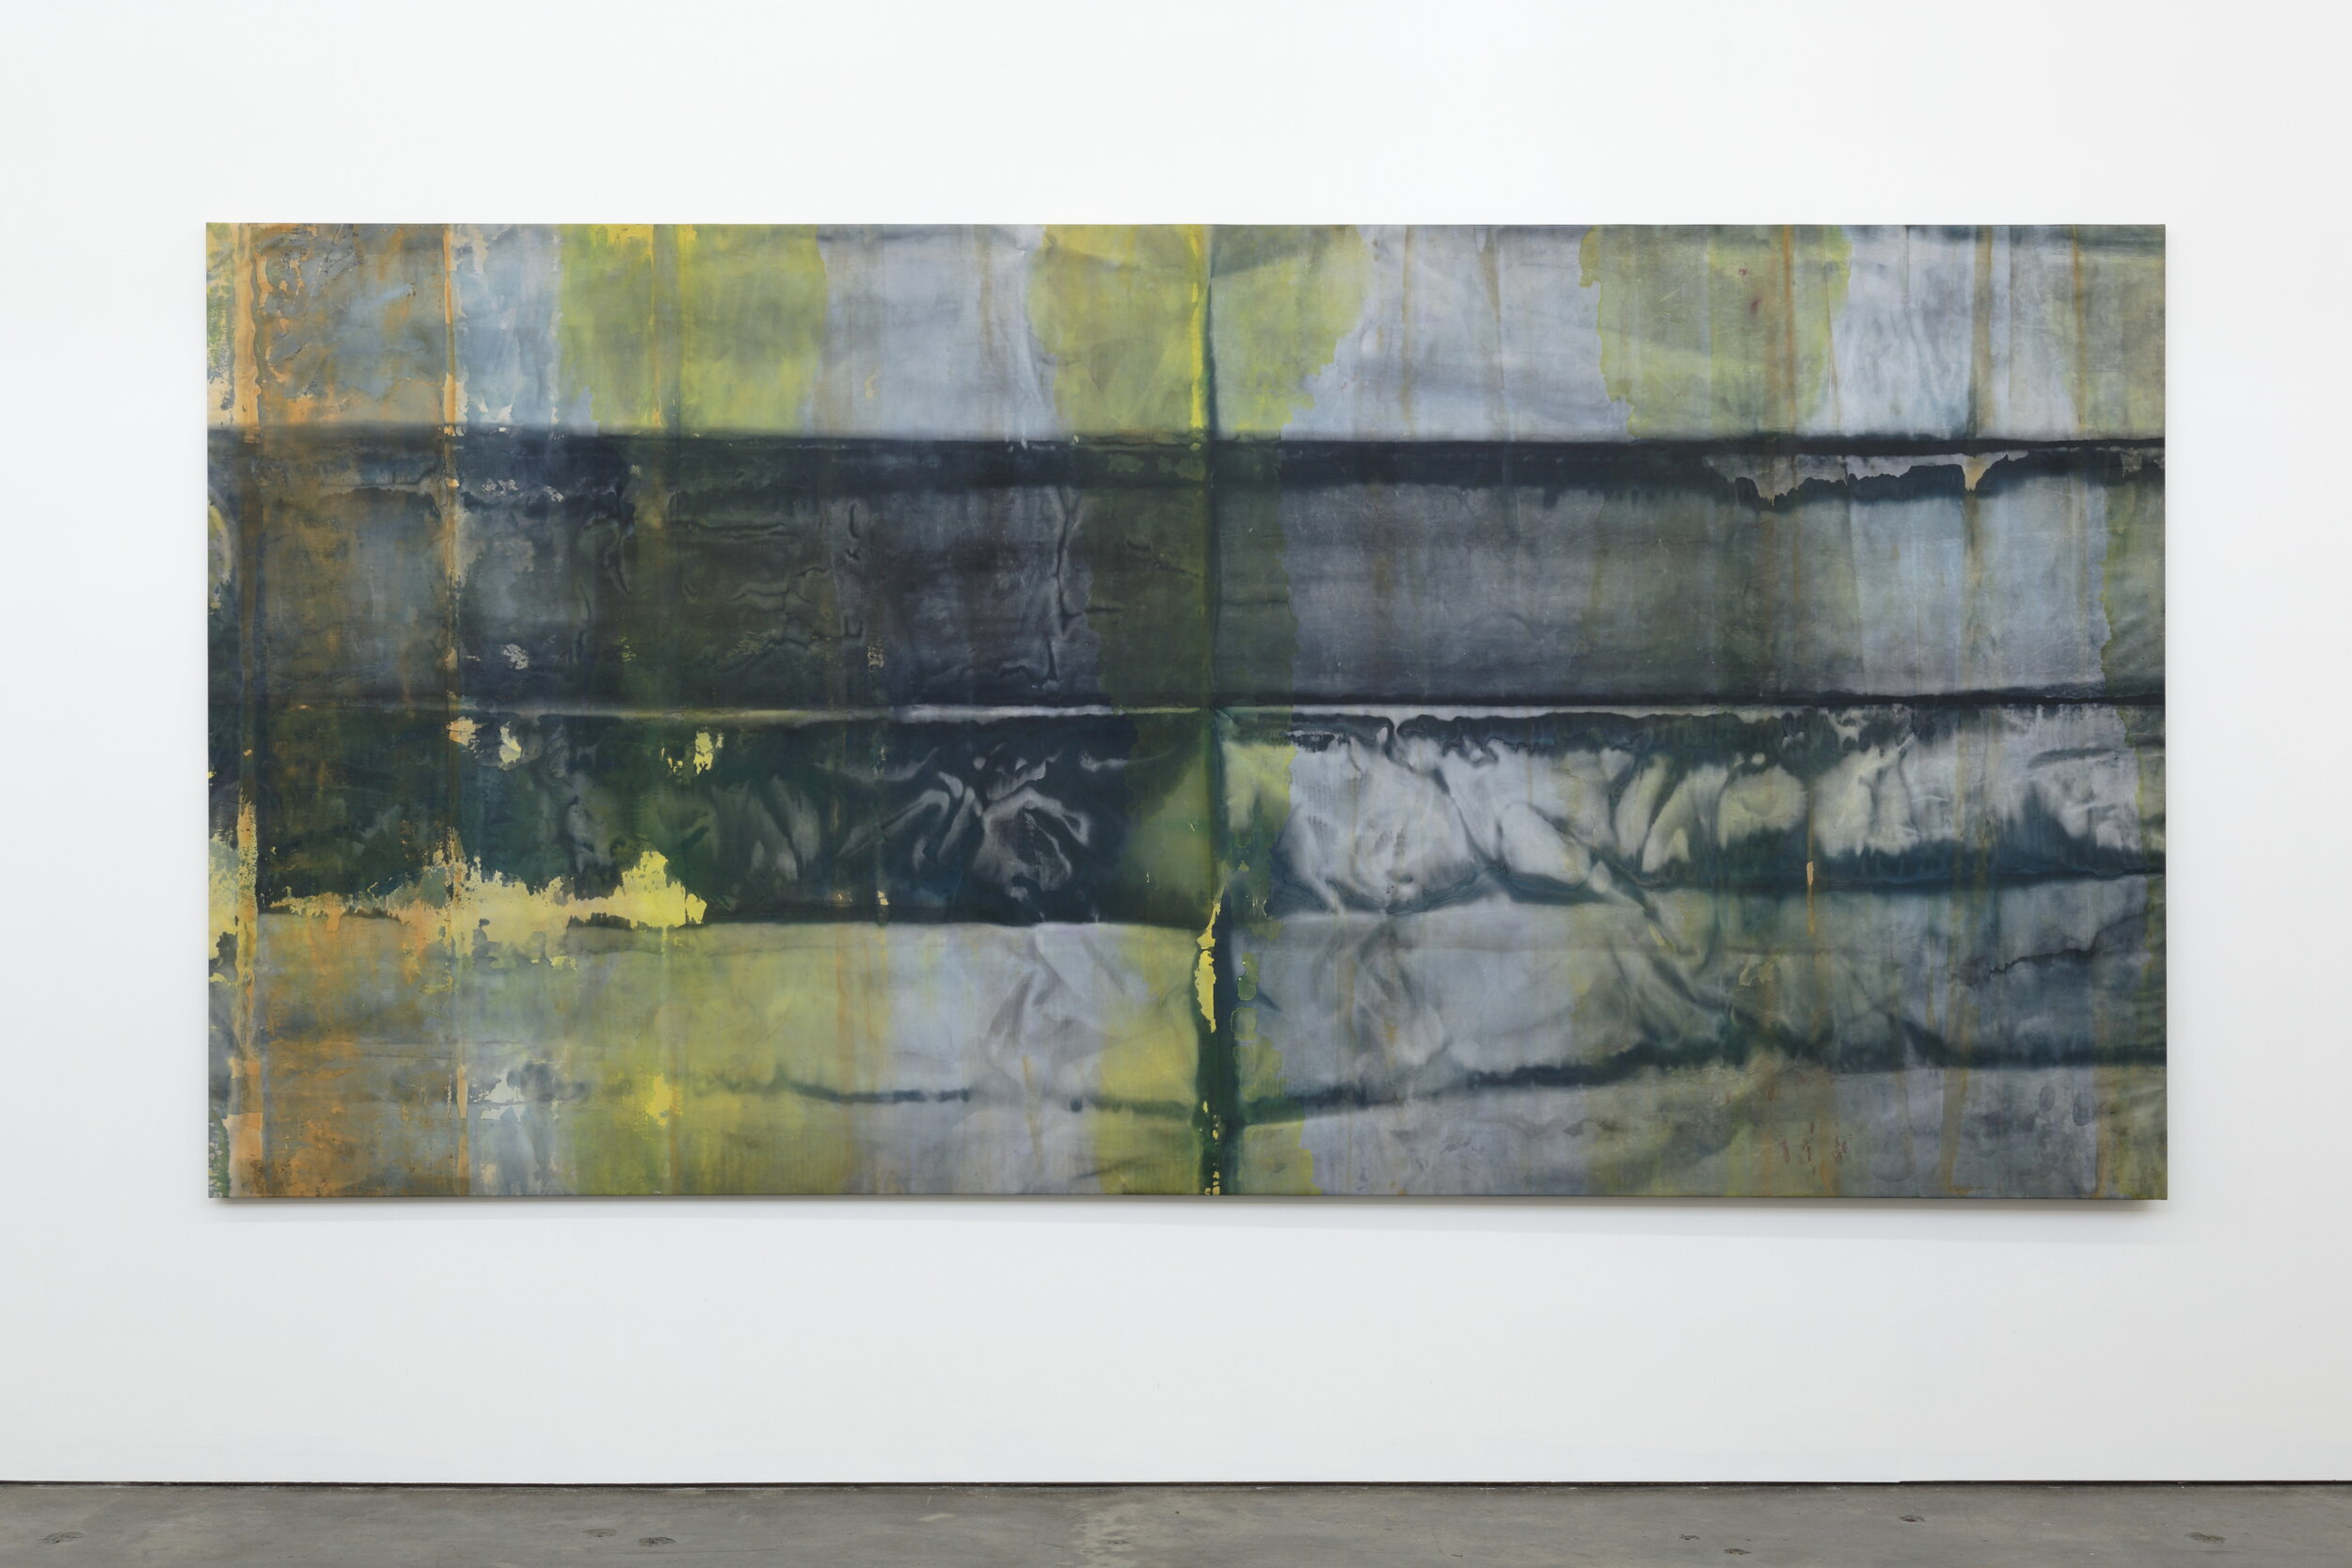   Visible Traces , 2019  Acrylic on knitted polyester voile  178 x 360 cm   